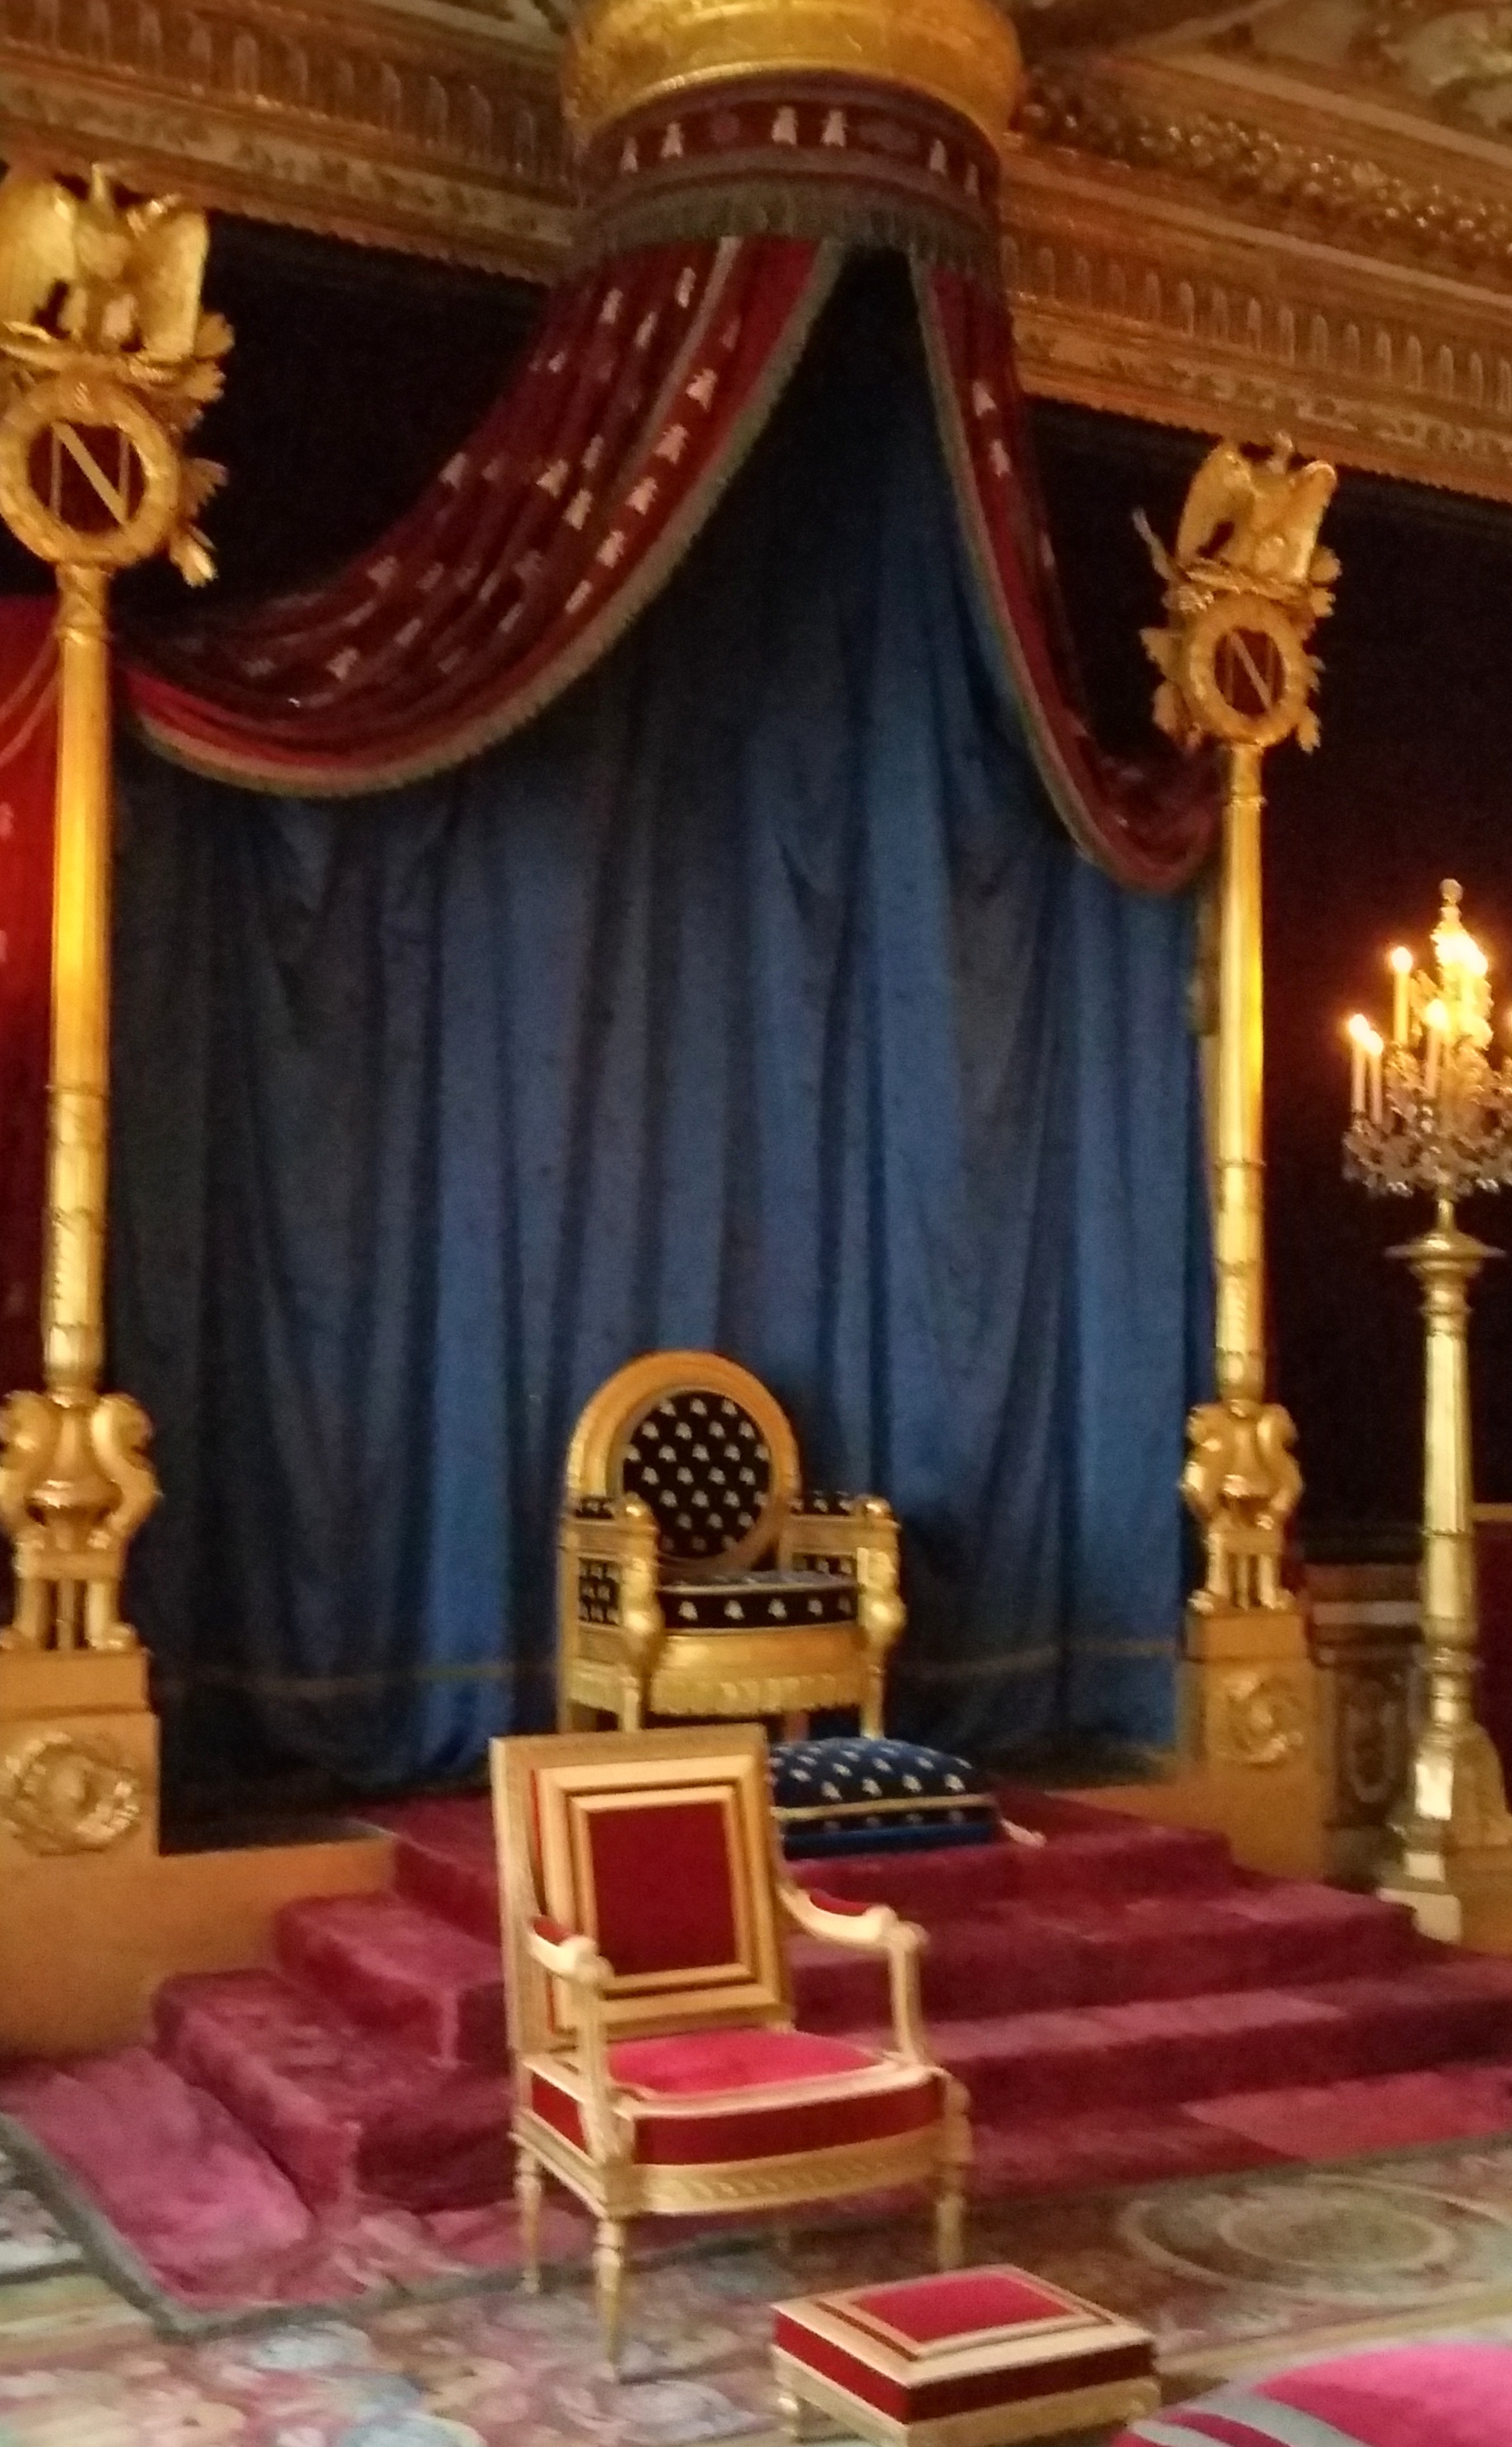 Throne room in the Palace of Fontainebleau, France